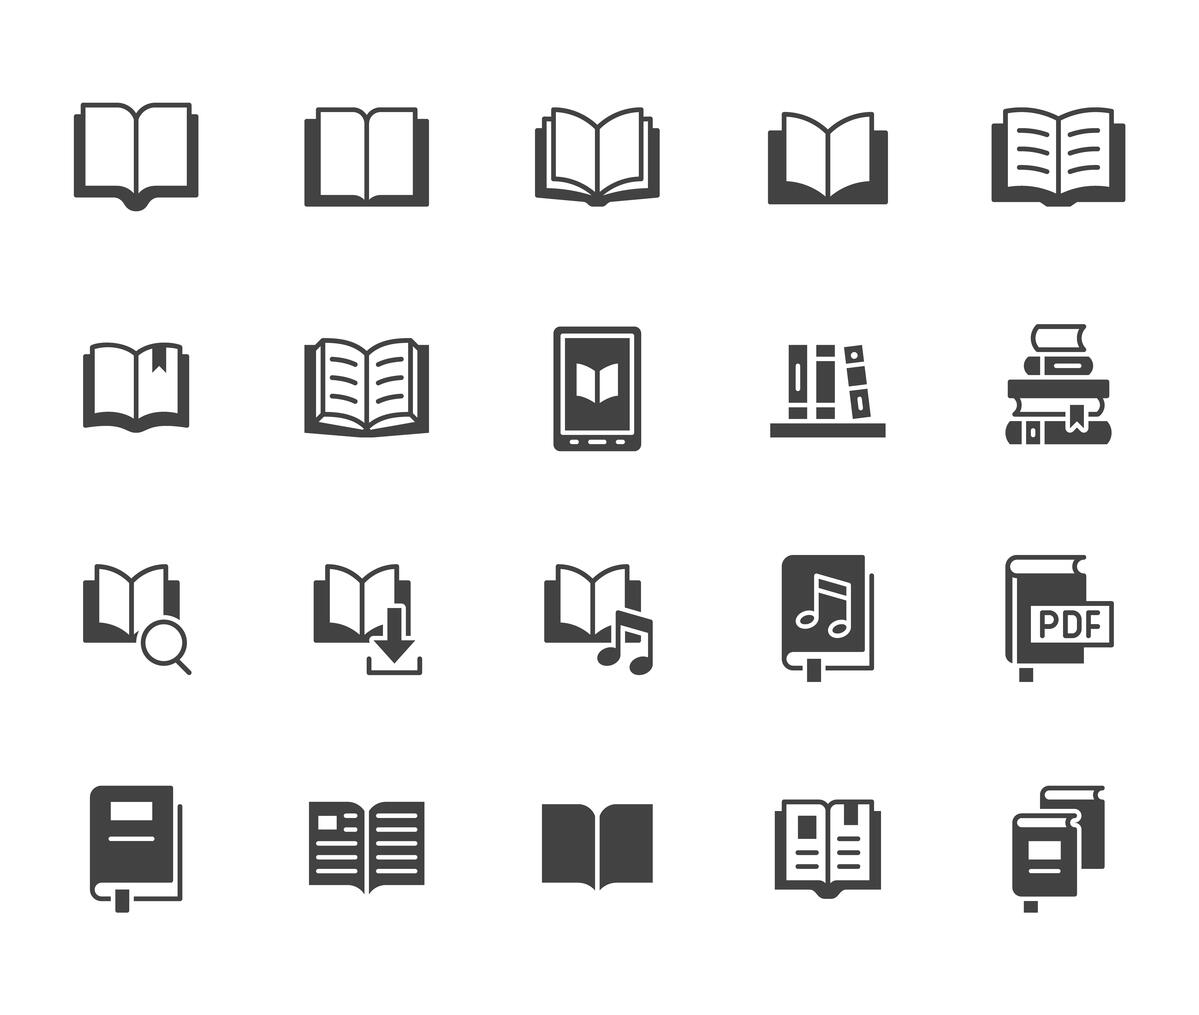 16 icons of books